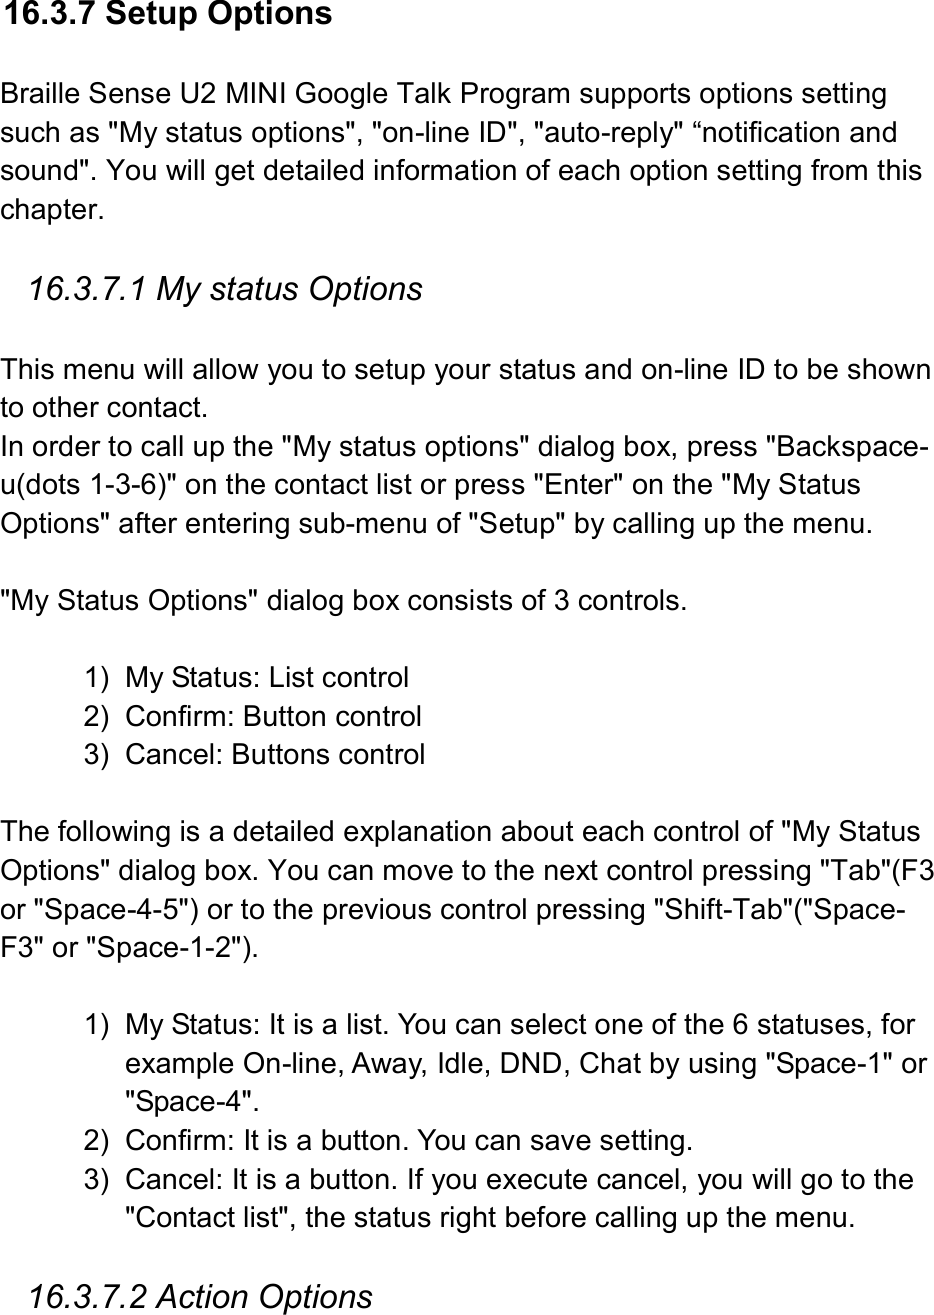   16.3.7 Setup Options  Braille Sense U2 MINI Google Talk Program supports options setting such as &quot;My status options&quot;, &quot;on-line ID&quot;, &quot;auto-reply&quot; “notification and sound&quot;. You will get detailed information of each option setting from this chapter.      16.3.7.1 My status Options  This menu will allow you to setup your status and on-line ID to be shown to other contact.   In order to call up the &quot;My status options&quot; dialog box, press &quot;Backspace-u(dots 1-3-6)&quot; on the contact list or press &quot;Enter&quot; on the &quot;My Status Options&quot; after entering sub-menu of &quot;Setup&quot; by calling up the menu.  &quot;My Status Options&quot; dialog box consists of 3 controls.  1)  My Status: List control 2)  Confirm: Button control 3)  Cancel: Buttons control  The following is a detailed explanation about each control of &quot;My Status Options&quot; dialog box. You can move to the next control pressing &quot;Tab&quot;(F3 or &quot;Space-4-5&quot;) or to the previous control pressing &quot;Shift-Tab&quot;(&quot;Space-F3&quot; or &quot;Space-1-2&quot;).  1)  My Status: It is a list. You can select one of the 6 statuses, for example On-line, Away, Idle, DND, Chat by using &quot;Space-1&quot; or &quot;Space-4&quot;. 2)  Confirm: It is a button. You can save setting. 3)  Cancel: It is a button. If you execute cancel, you will go to the &quot;Contact list&quot;, the status right before calling up the menu.    16.3.7.2 Action Options  